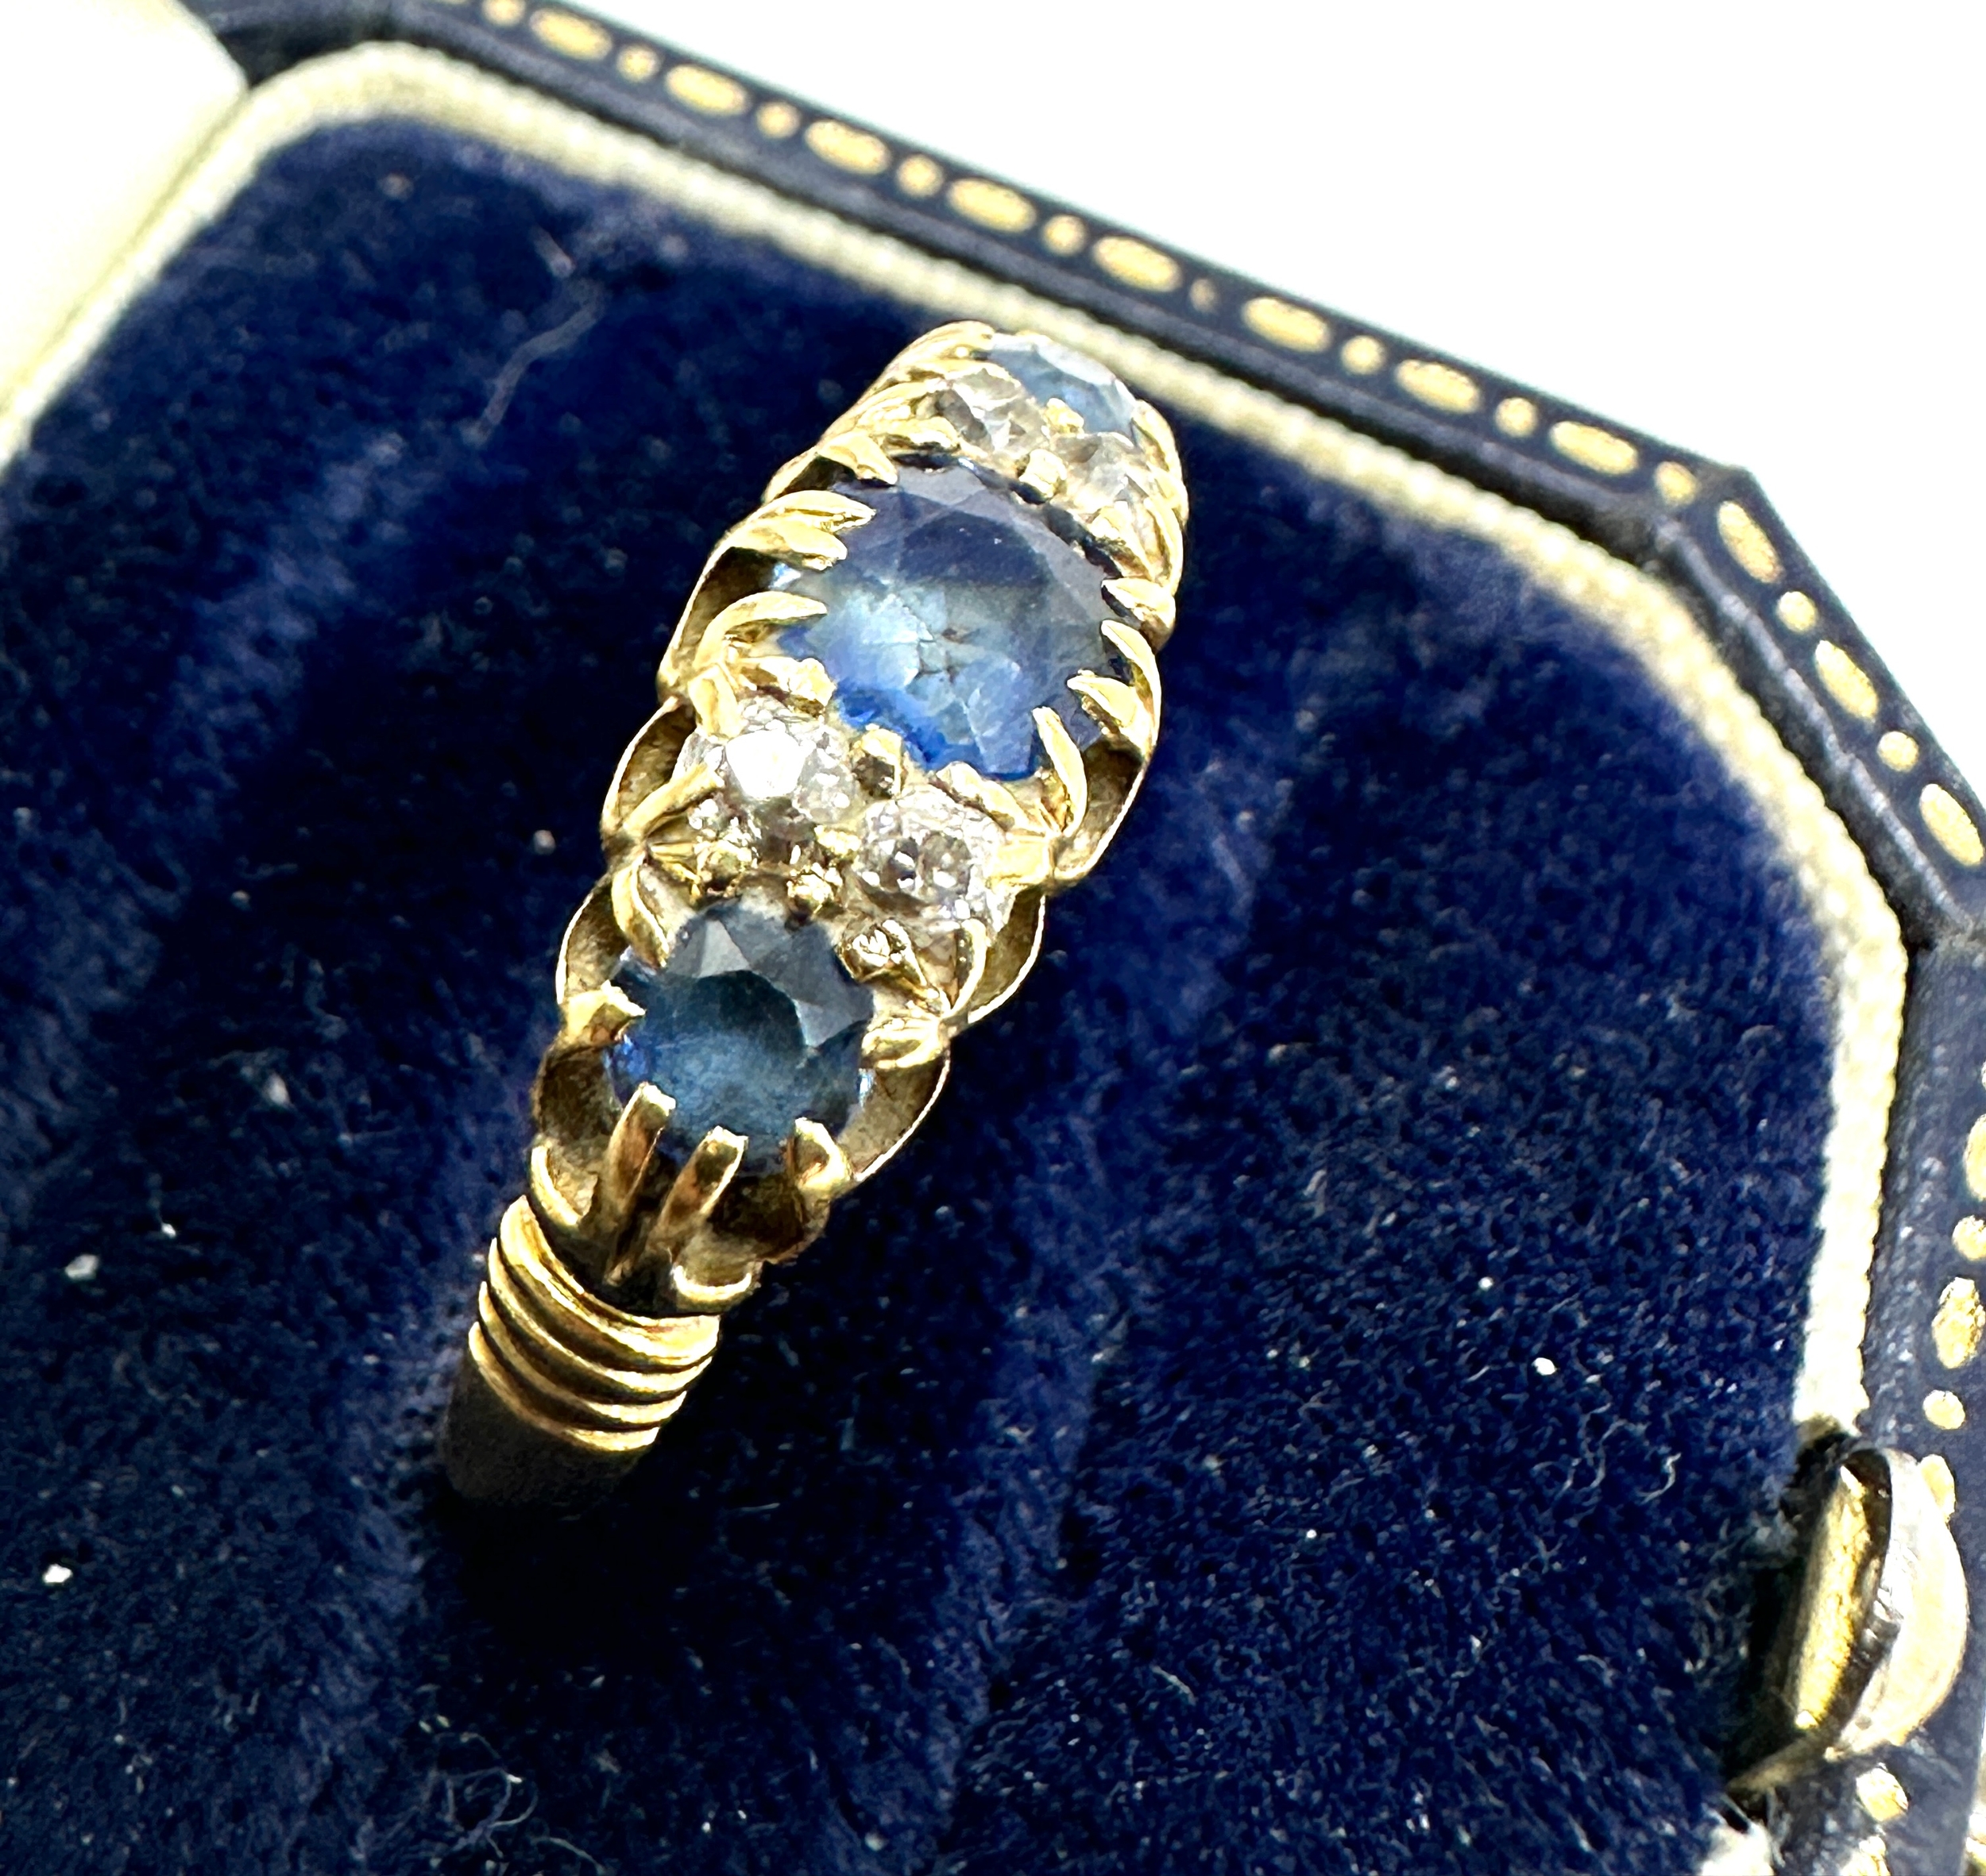 Antique 18ct gold sapphire & diamond ring weight 3.6g - Image 2 of 4